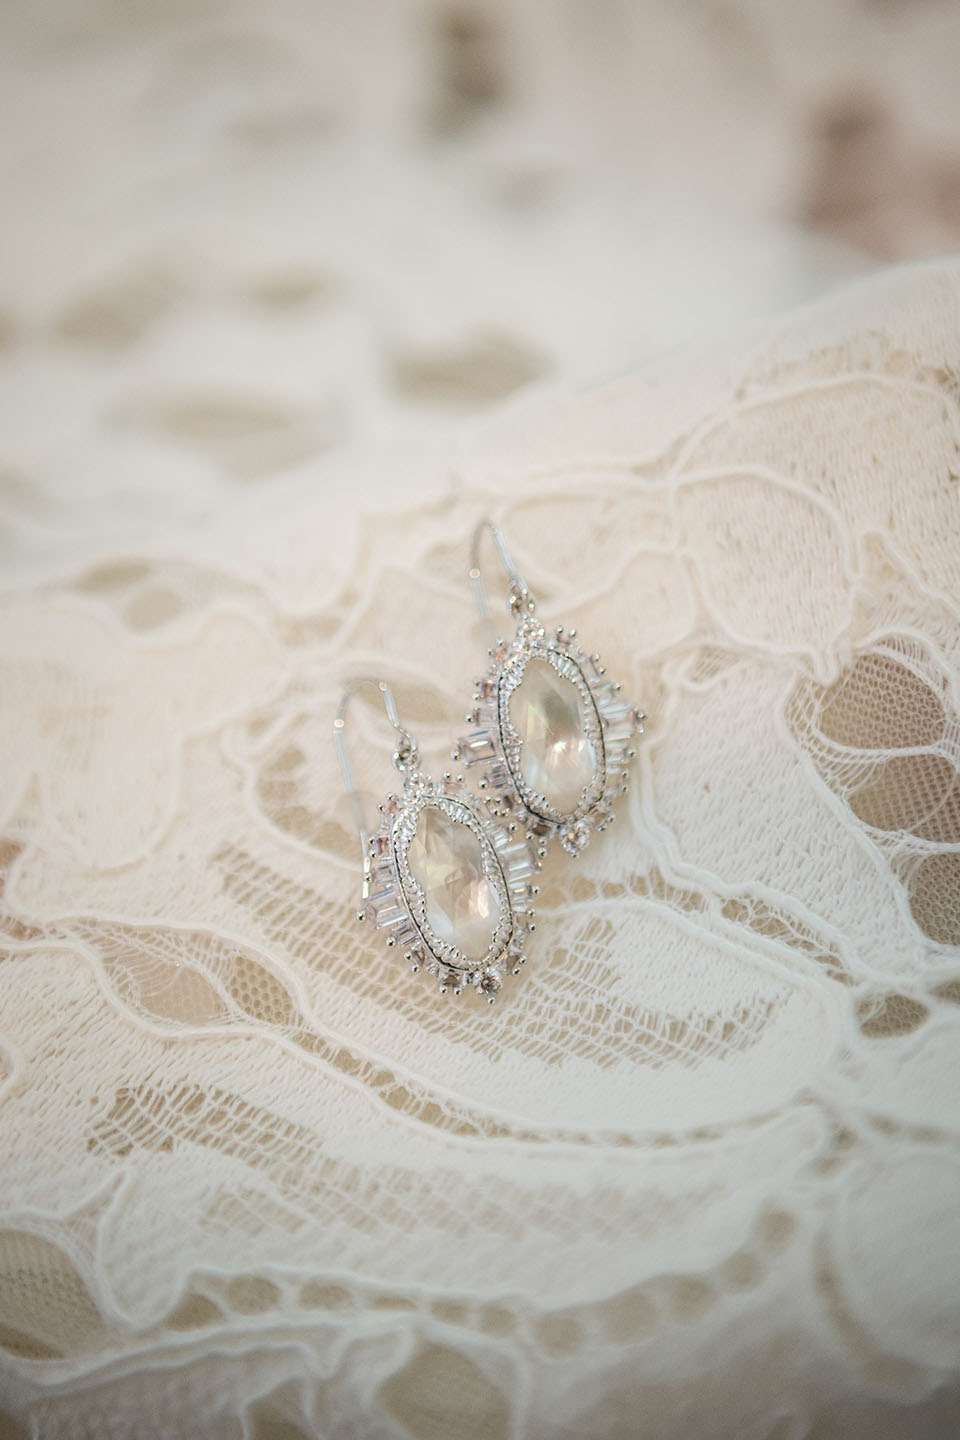 Bridal Earrings Laying on Lace